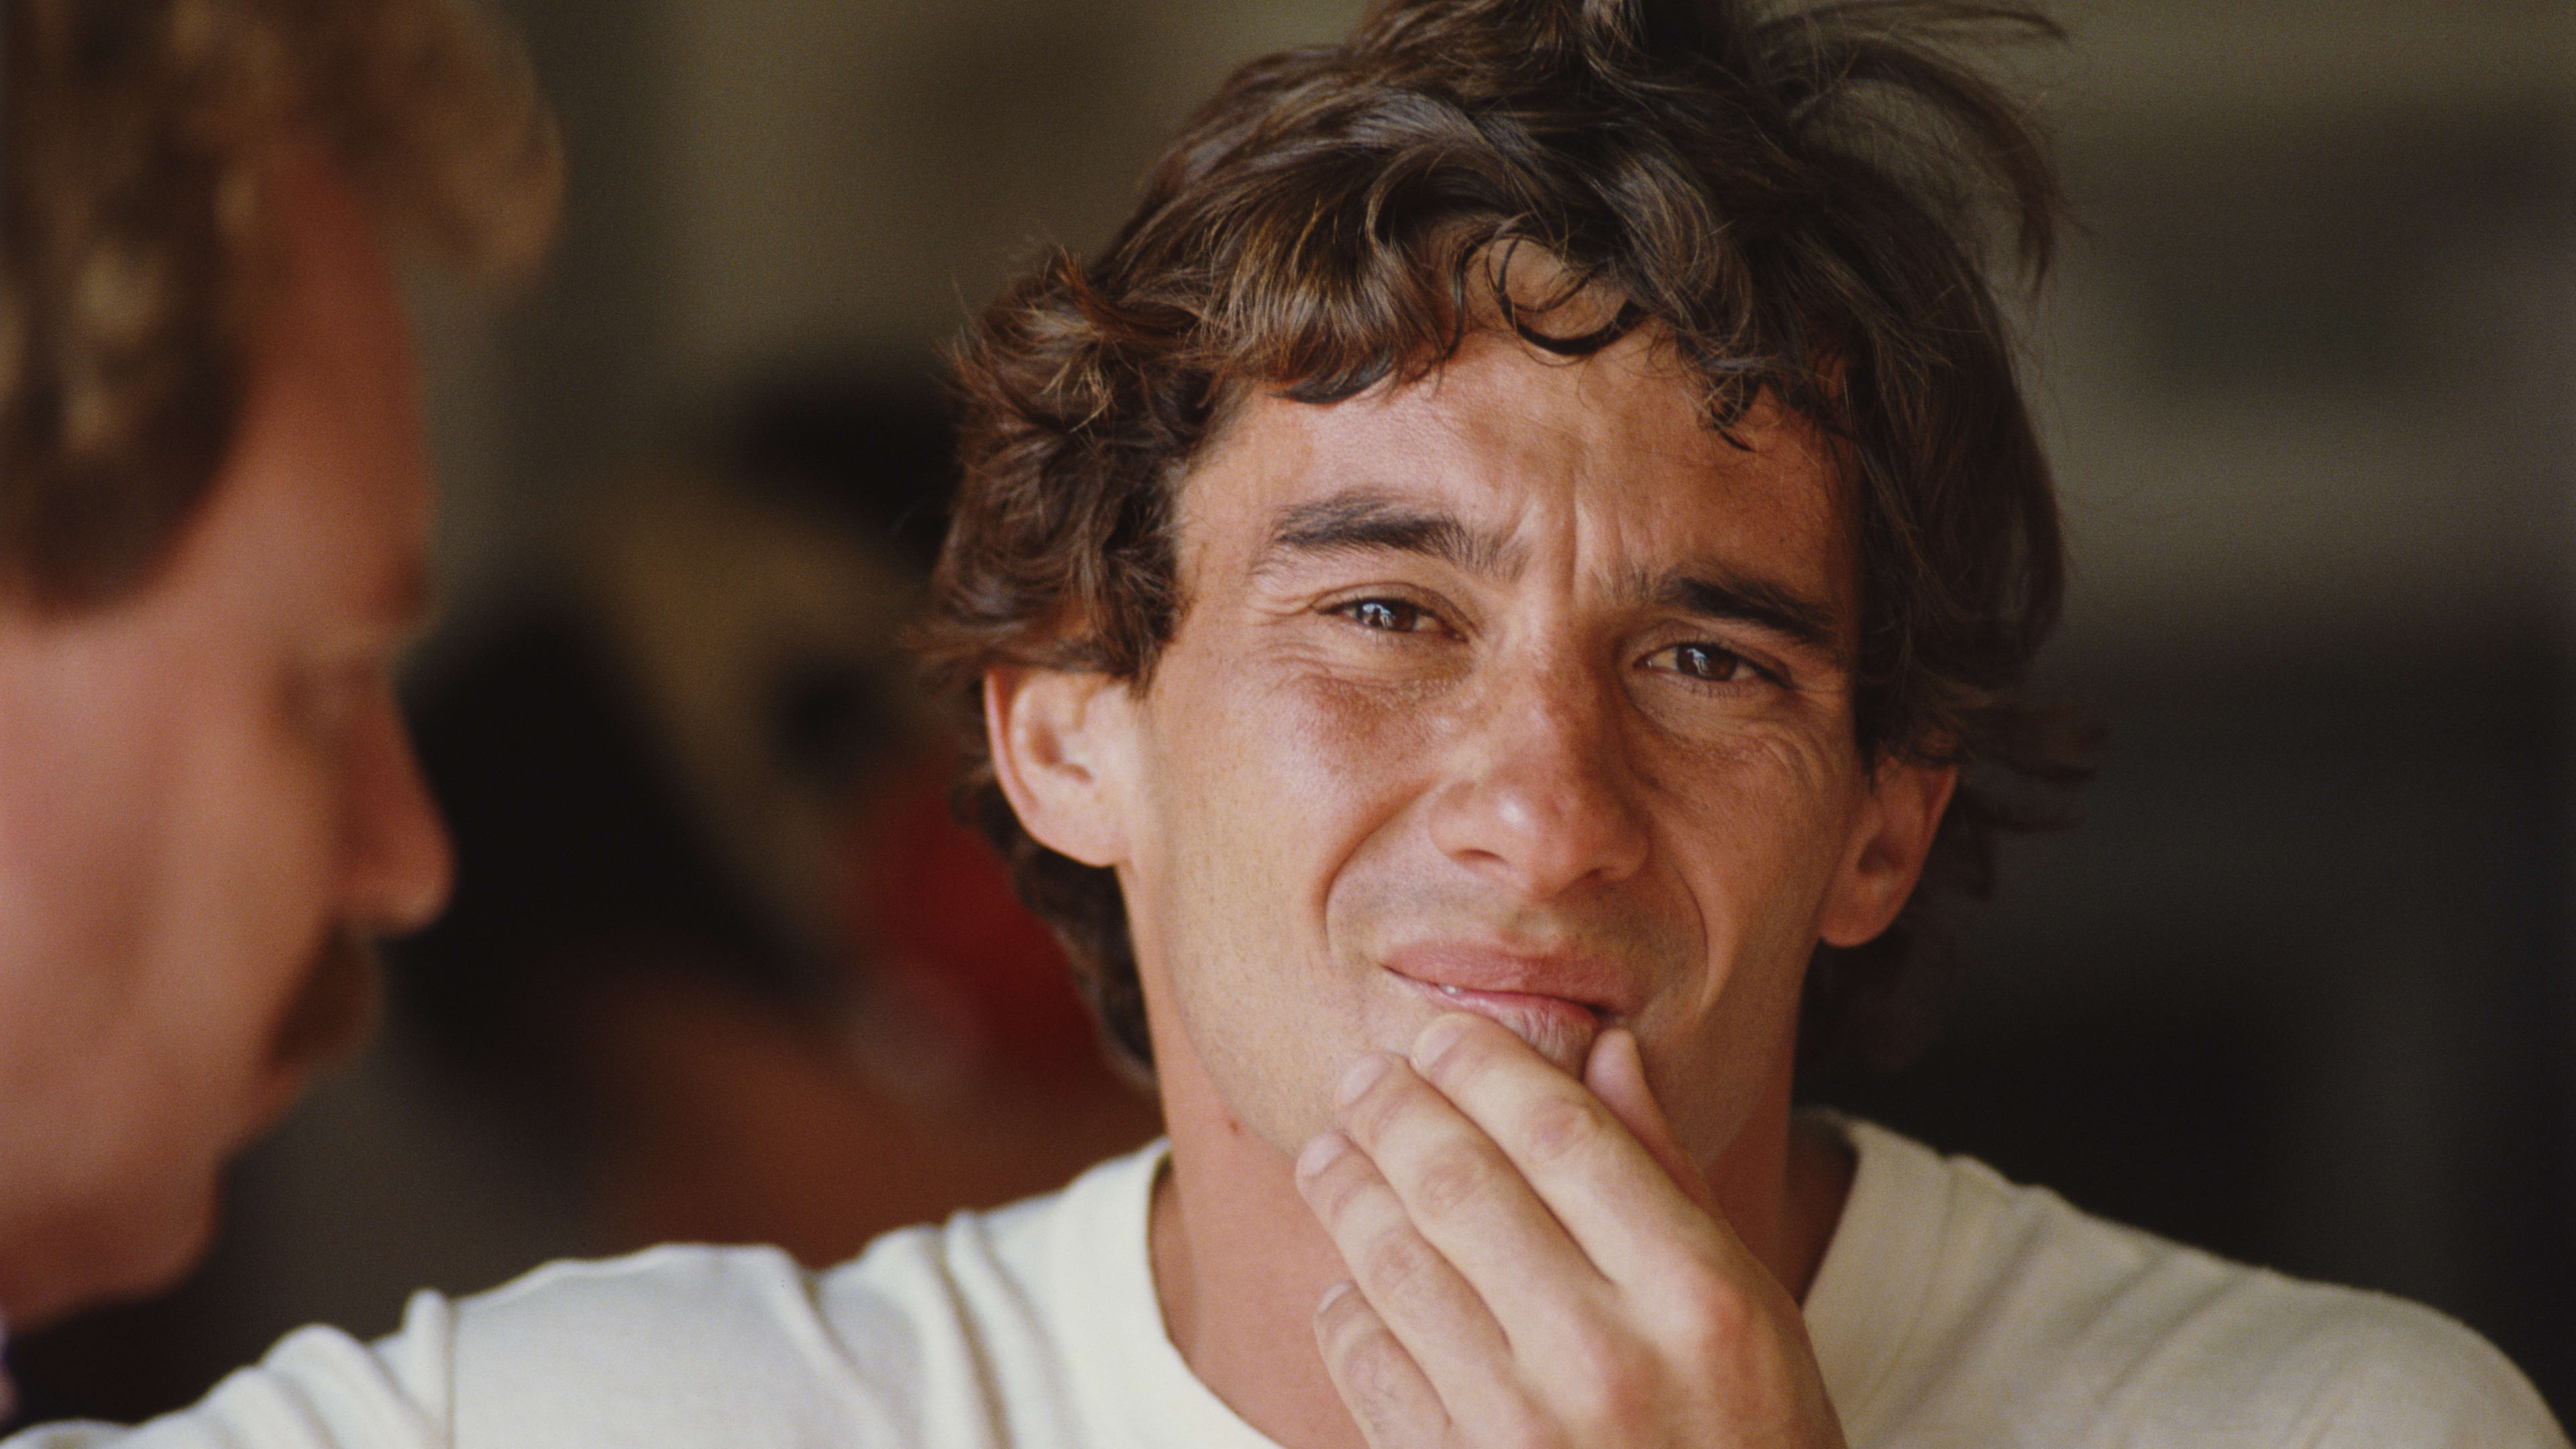 ‘An incredible legend of the sport’ – F1 drivers pay tribute to Ayrton Senna 30 years after his tragic death